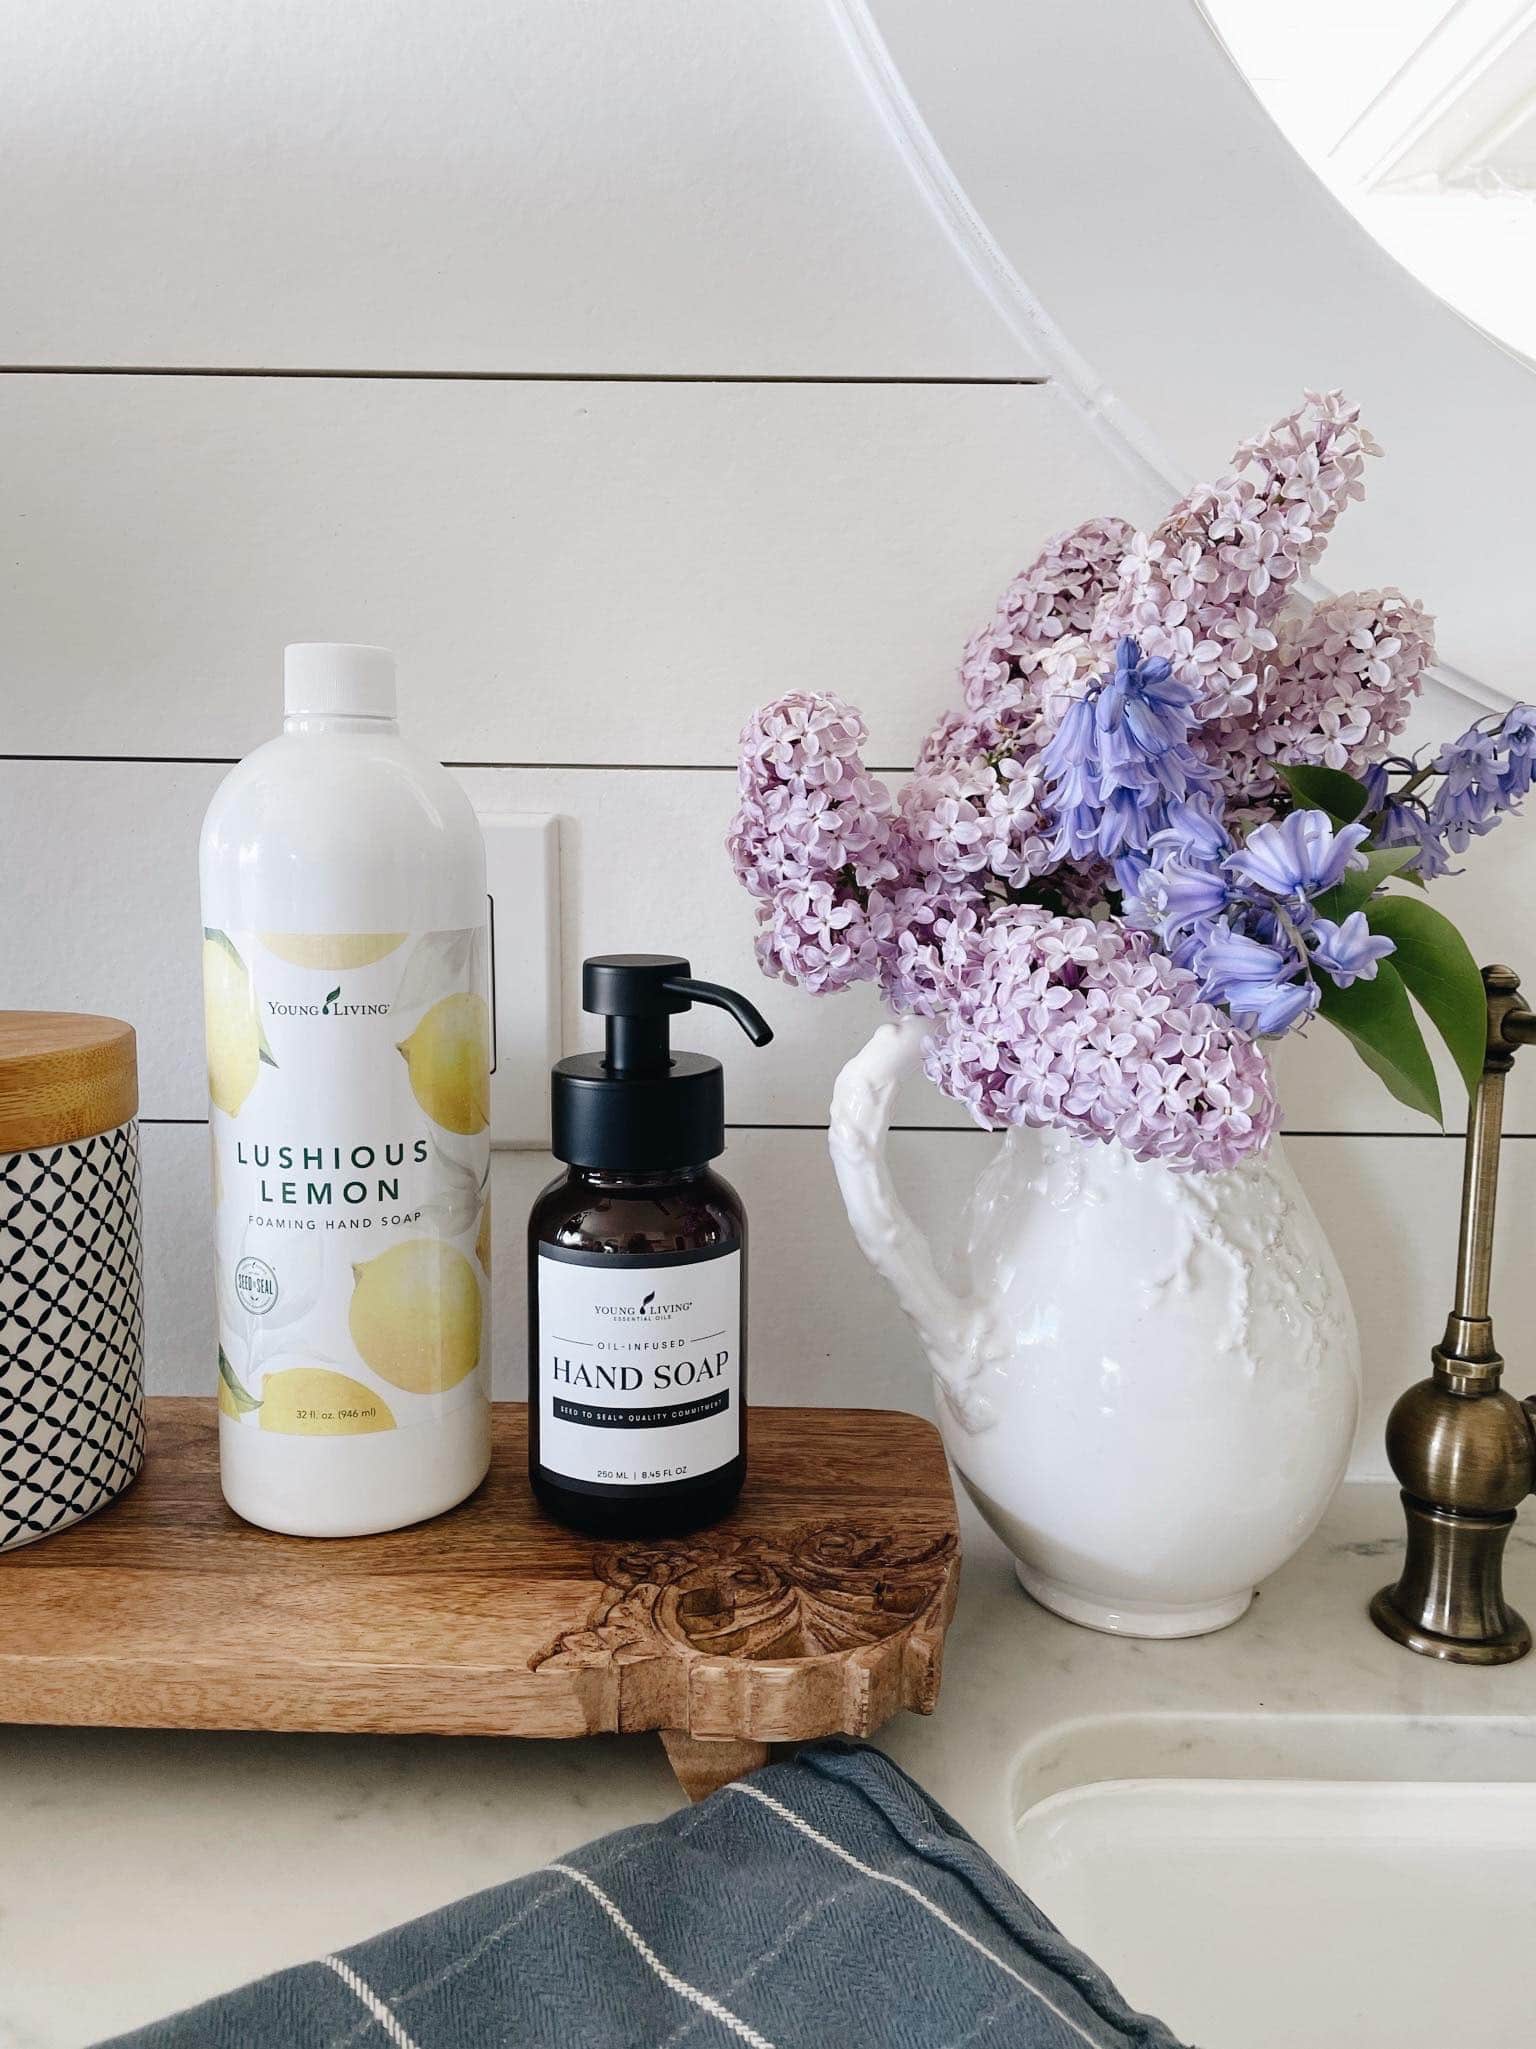 How I'm Making My Home Smell Clean and Pretty for Spring (+ Spring Diffuser Recipes)